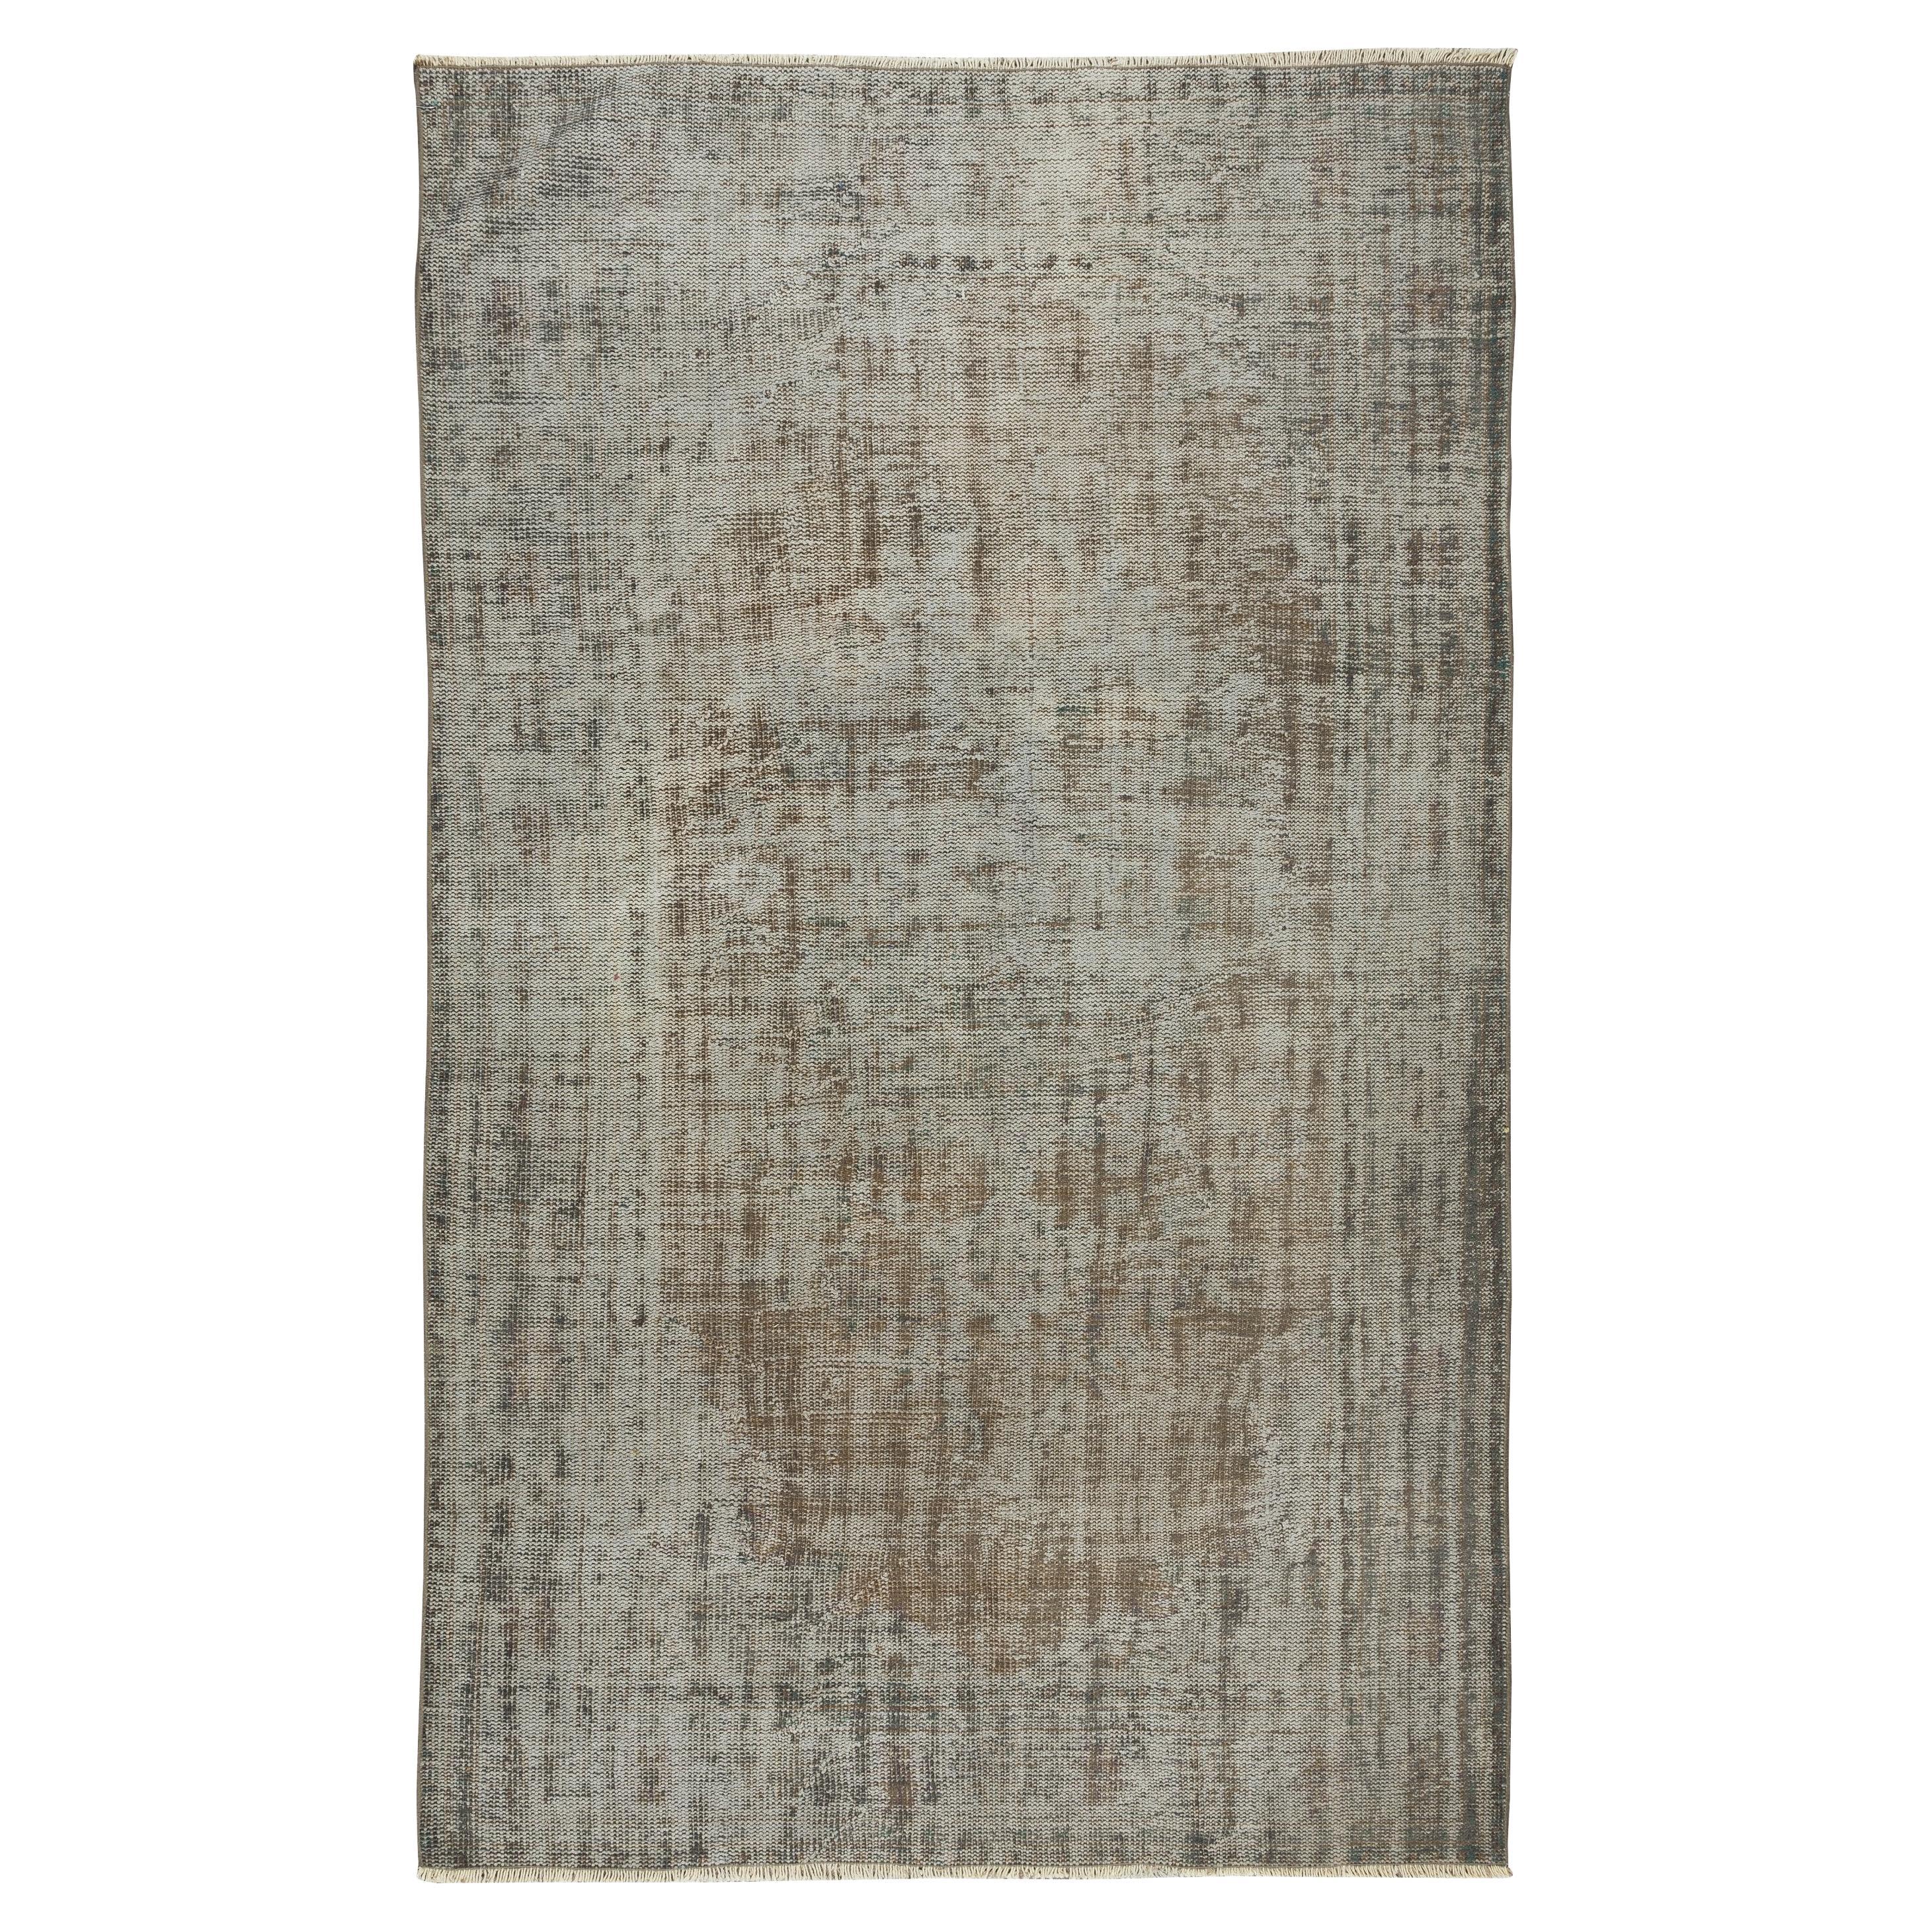 Vintage Turkish Area Rug in Gray, Hand Knotted Shabby Chic Wool Carpet For Sale